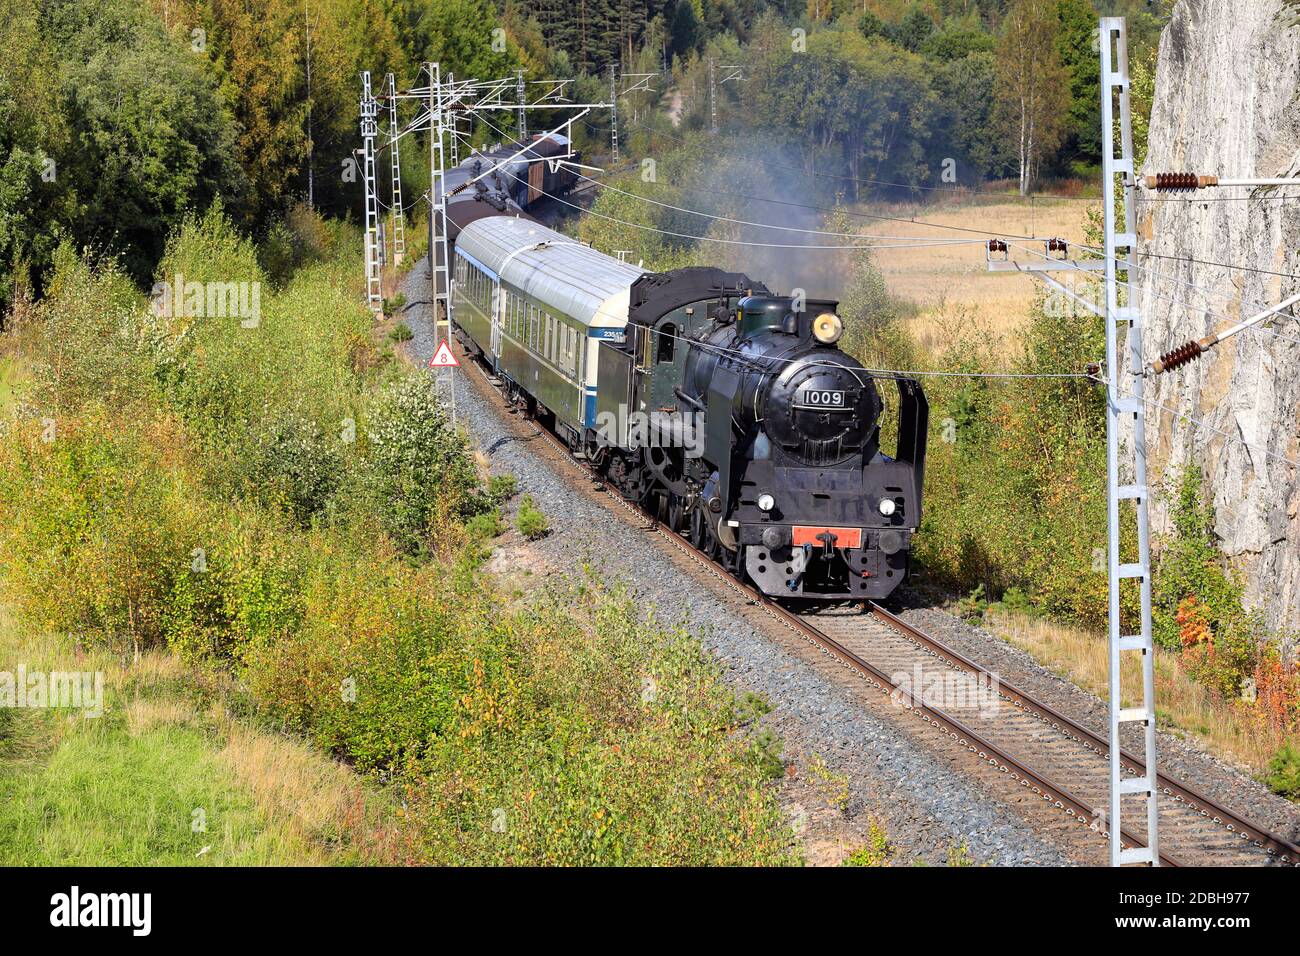 Hr1 class steam locomotive Ukko-Pekka 1009 pulling carriages through rural scenery, elevated view. Salo, Finland. September 20, 2020. Stock Photo